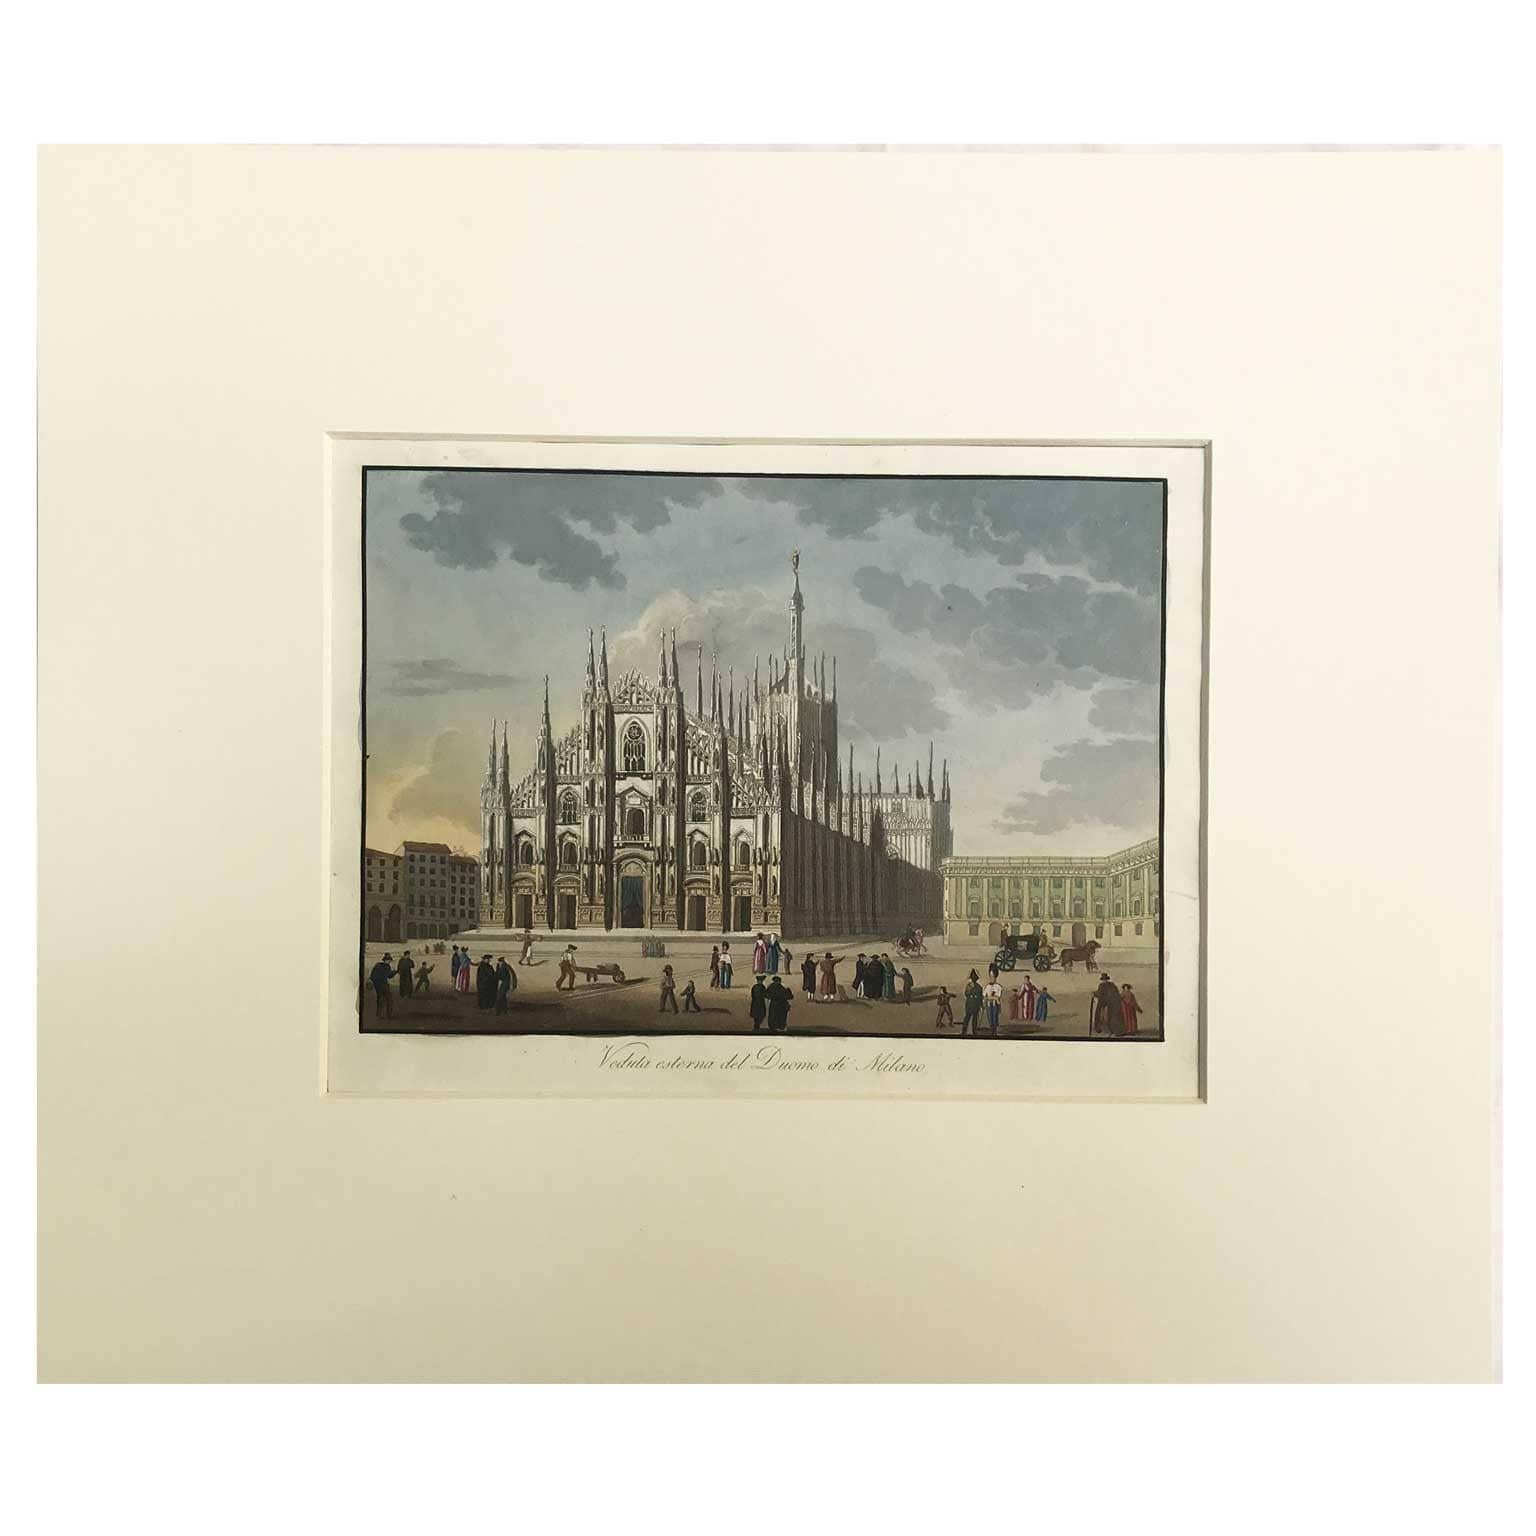 An original early 19th century engraving print, Milan Cathedral Square and the Duomo.

A stunning hand-coloured engraving, depicts a frontal view of the spectacular Gothic cathedral or Duomo in Milan, the largest church in Italy and the fifth